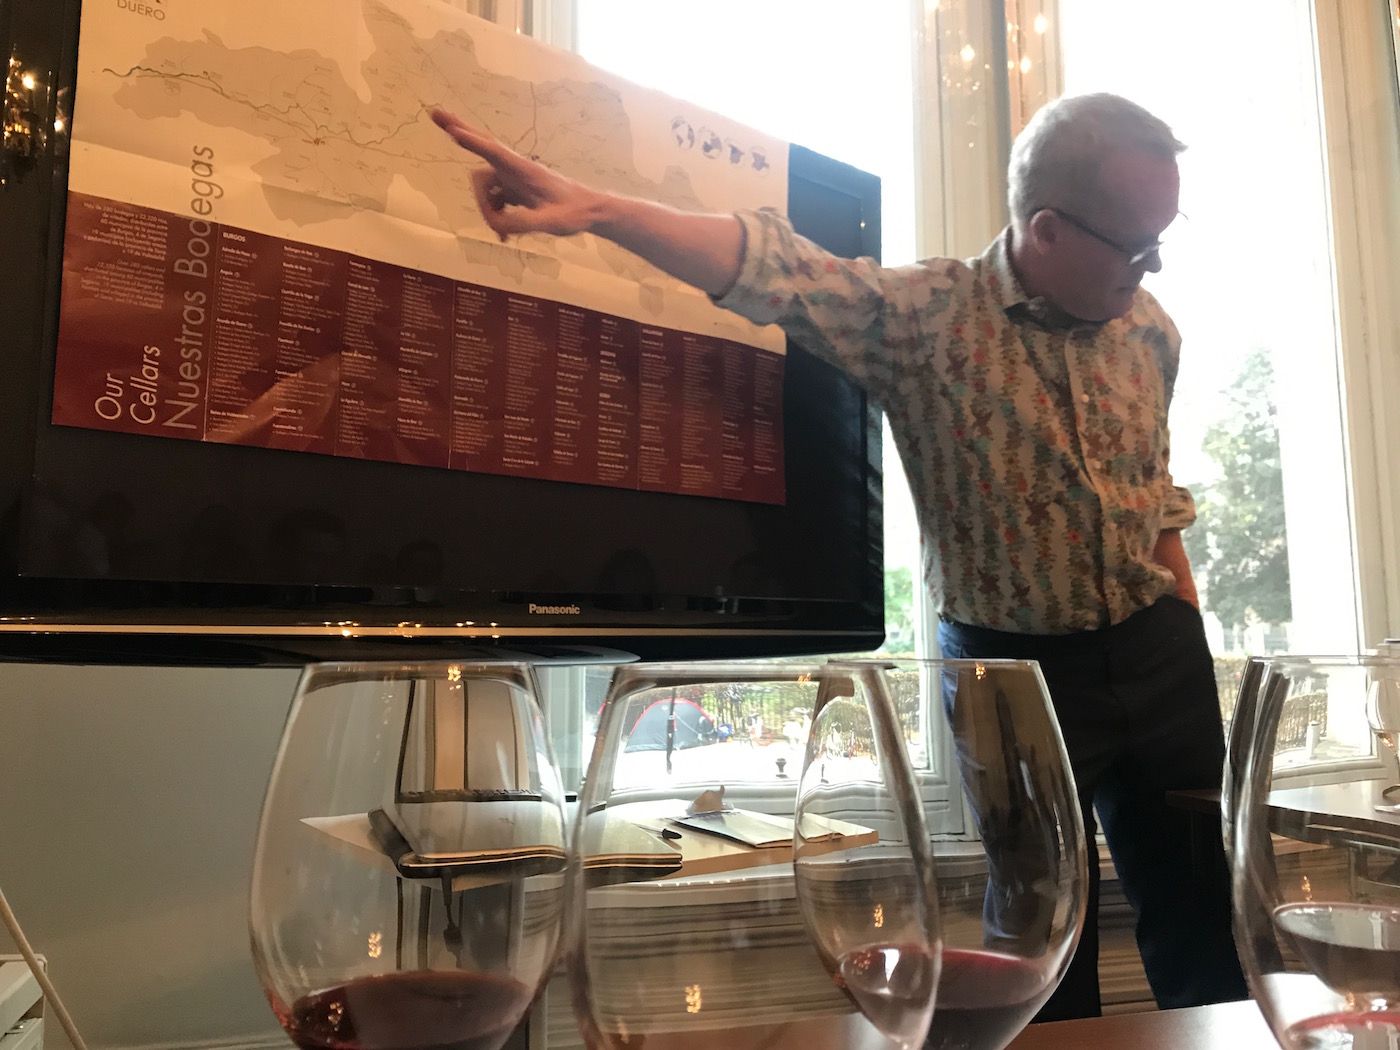 10 of the best Ribera Del Duero reds picked by Tim Atkin MW